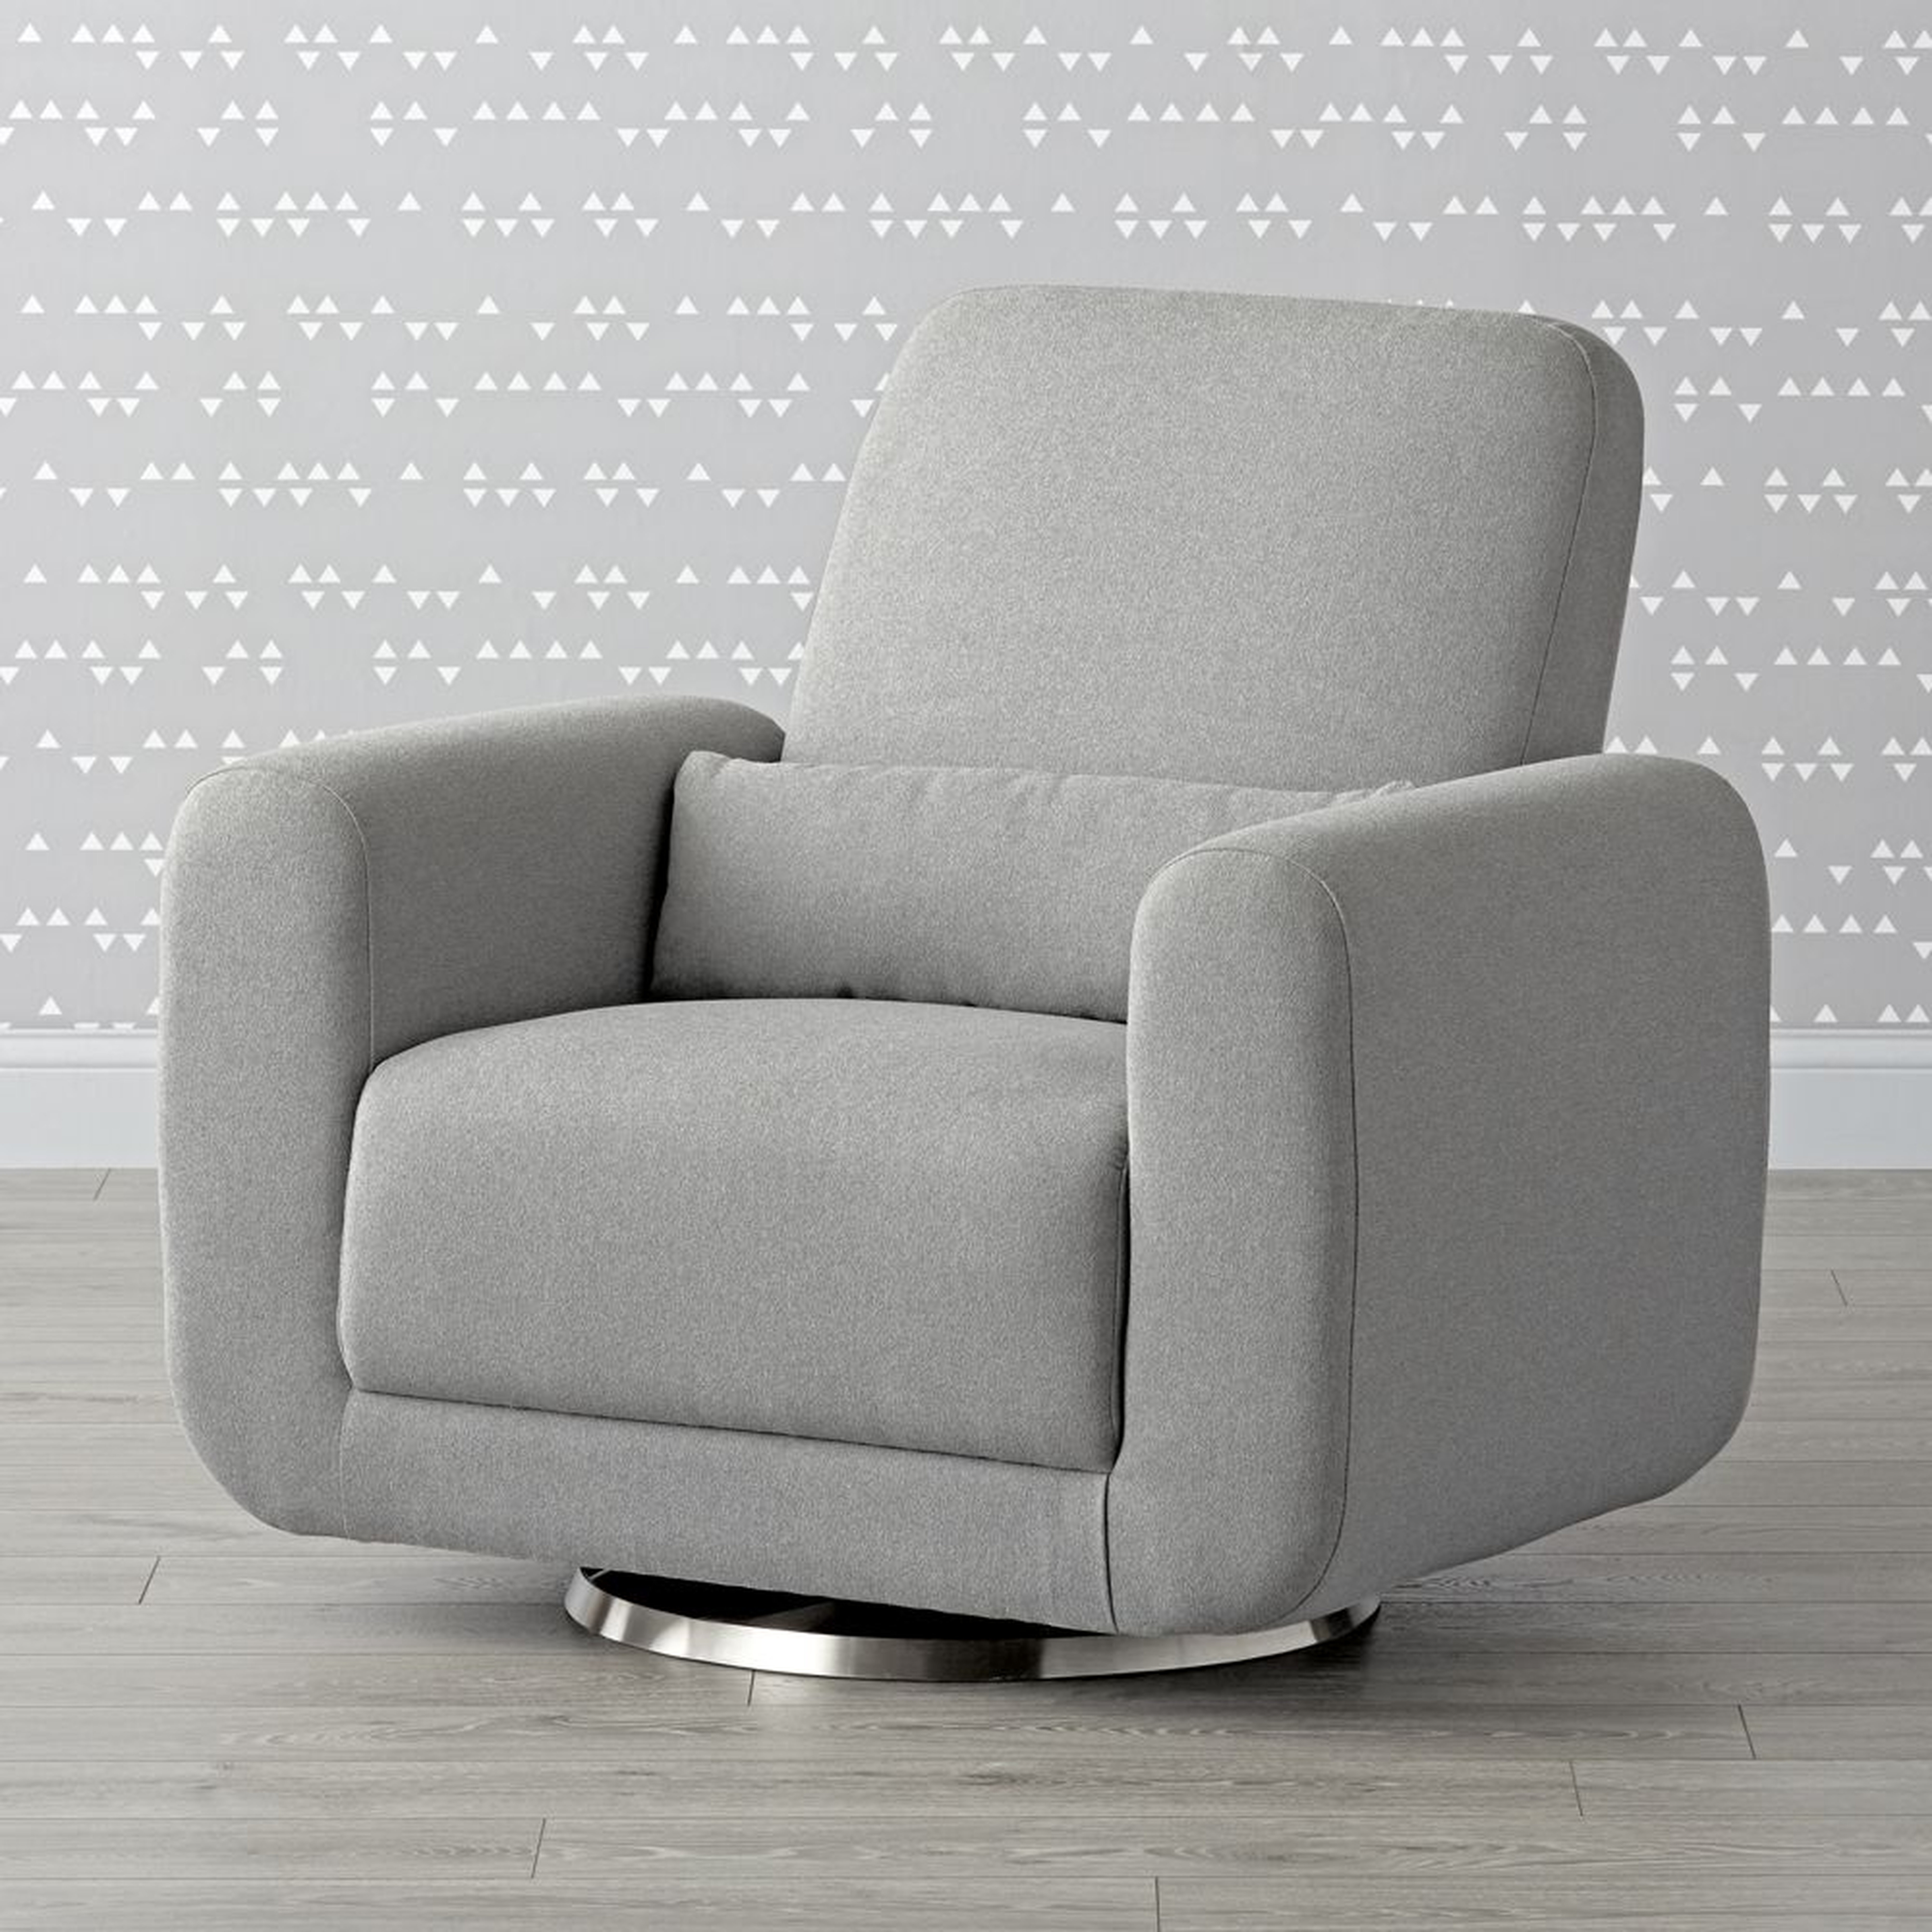 Babyletto Tuba Swivel Glider Chair and a Half - Crate and Barrel